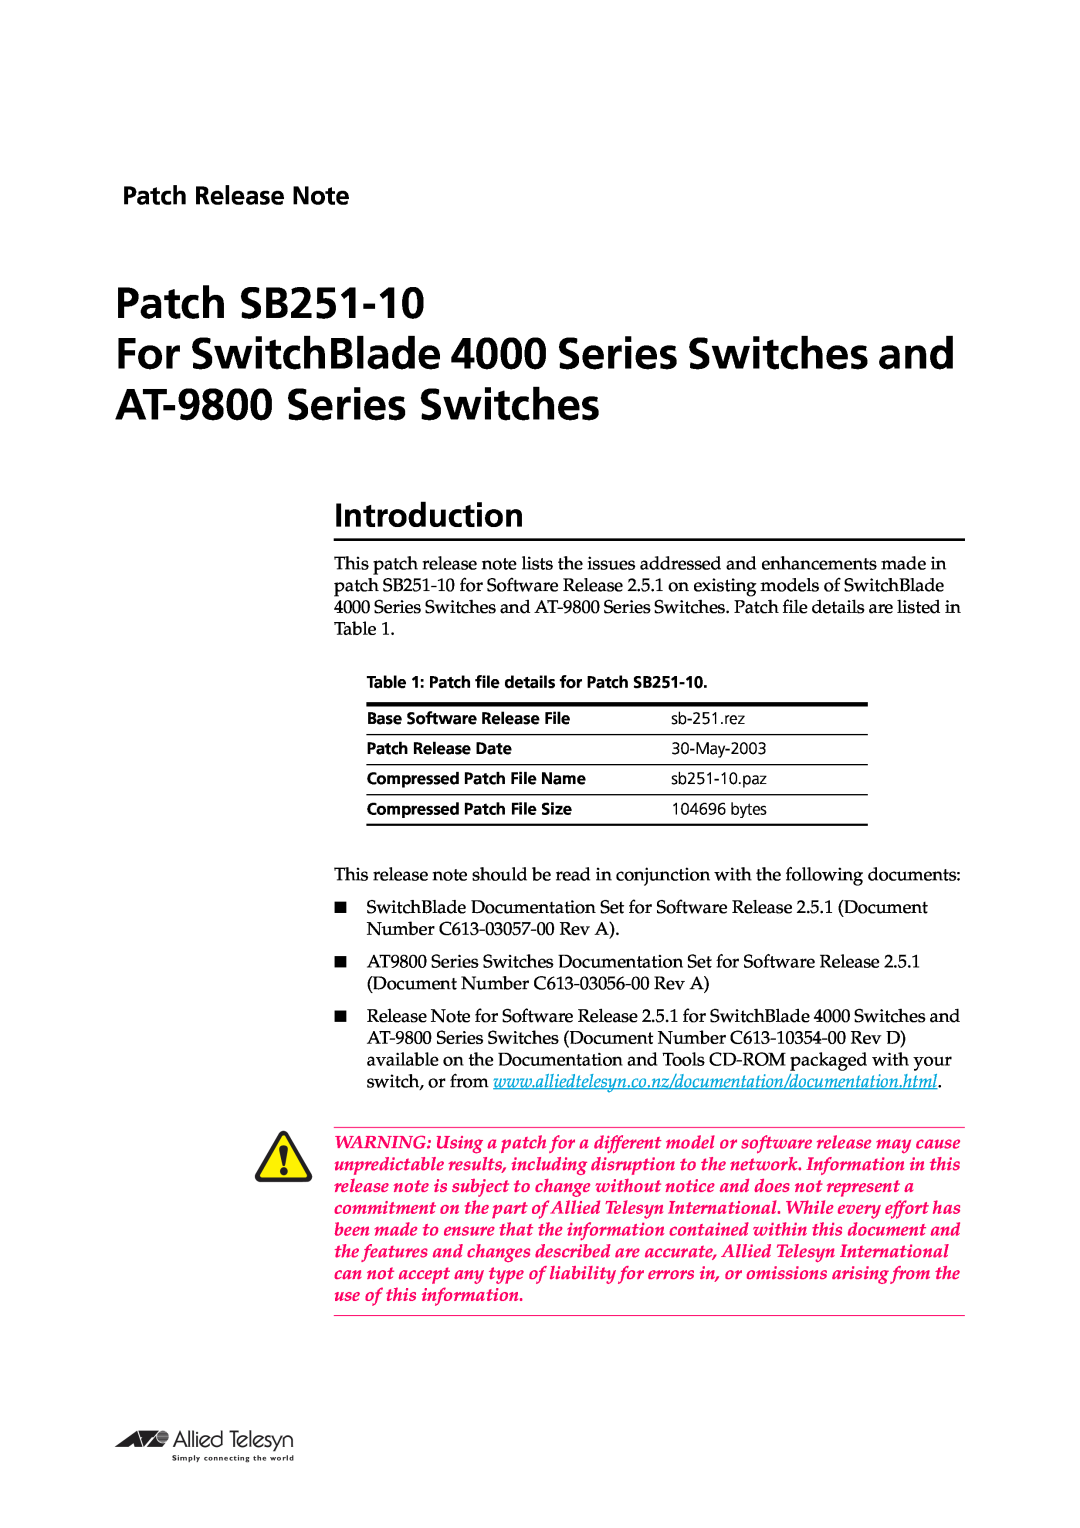 Allied Telesis manual Introduction, Patch SB251-10 For SwitchBlade 4000 Series Switches and, AT-9800 Series Switches 